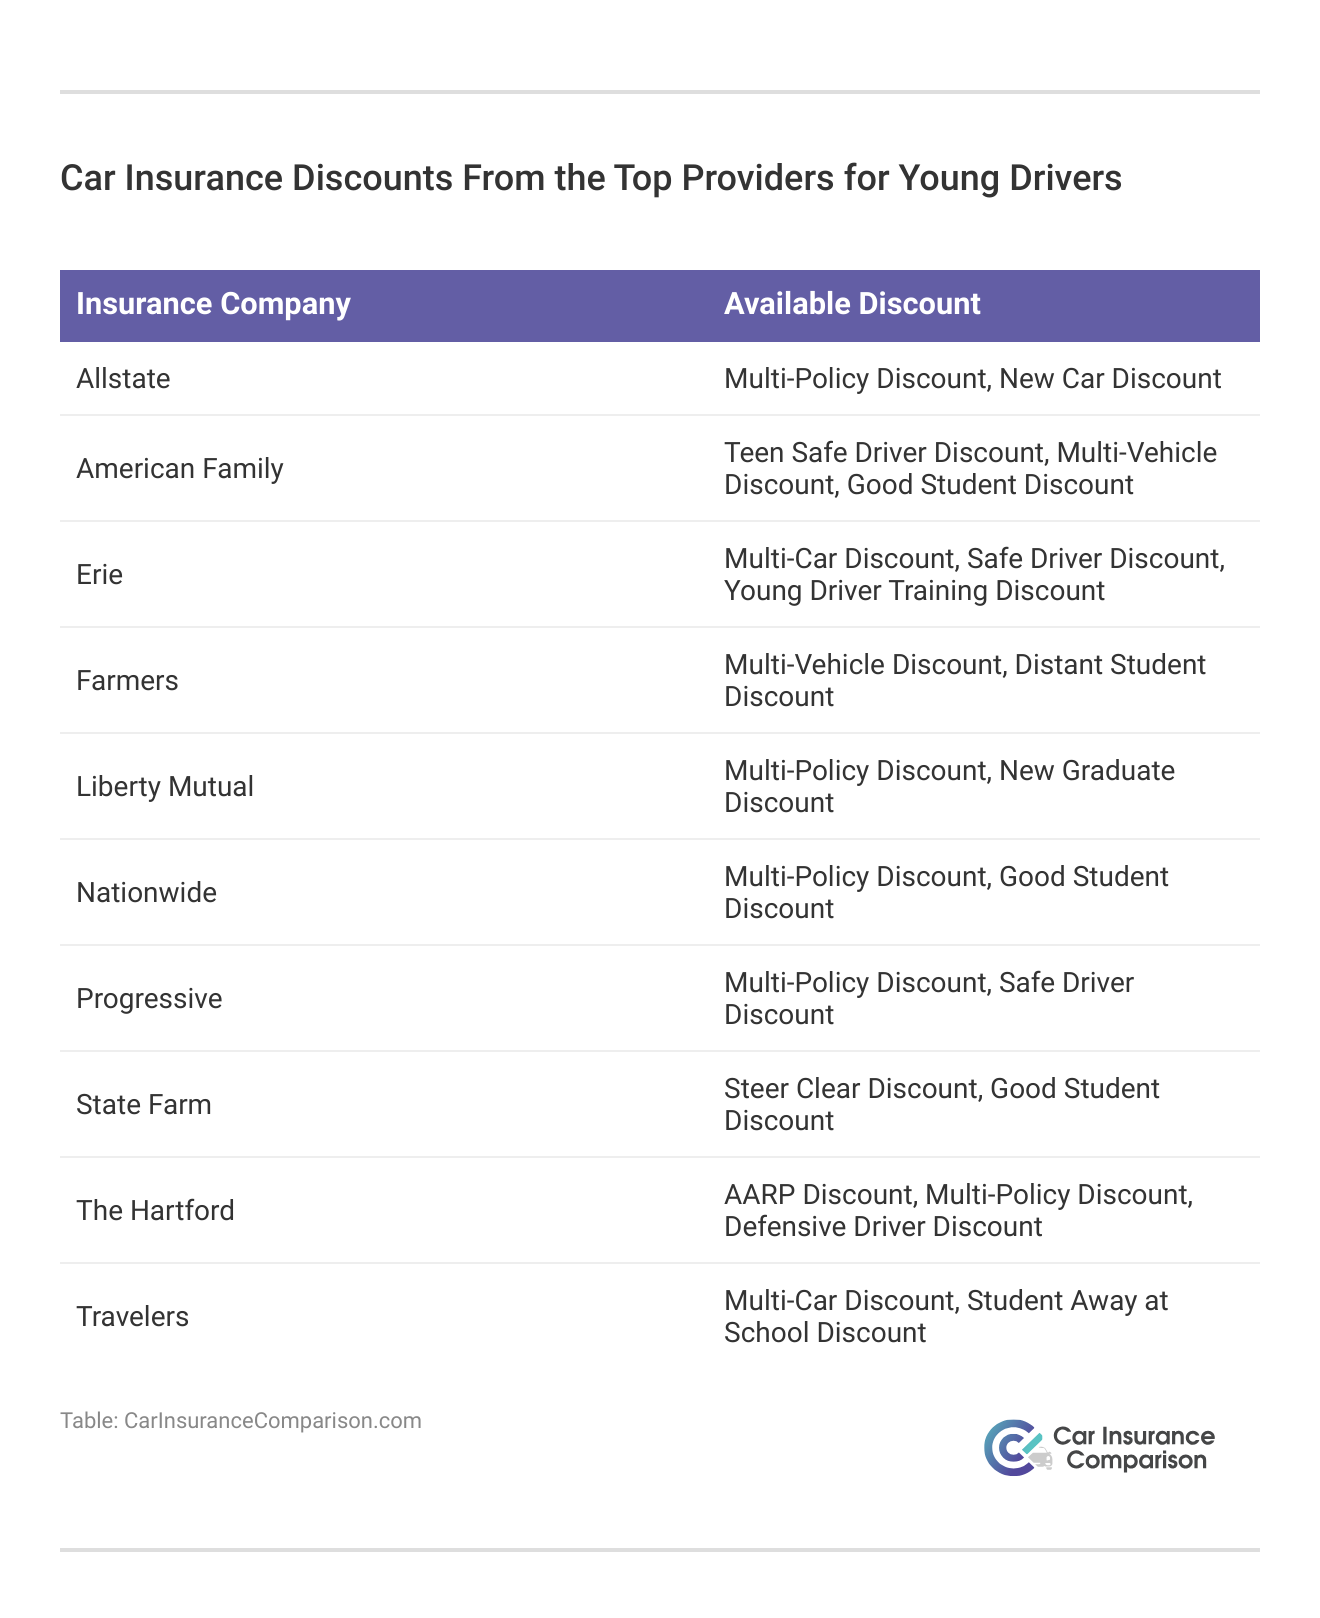 <h3>Car Insurance Discounts From the Top Providers for Young Drivers</h3>